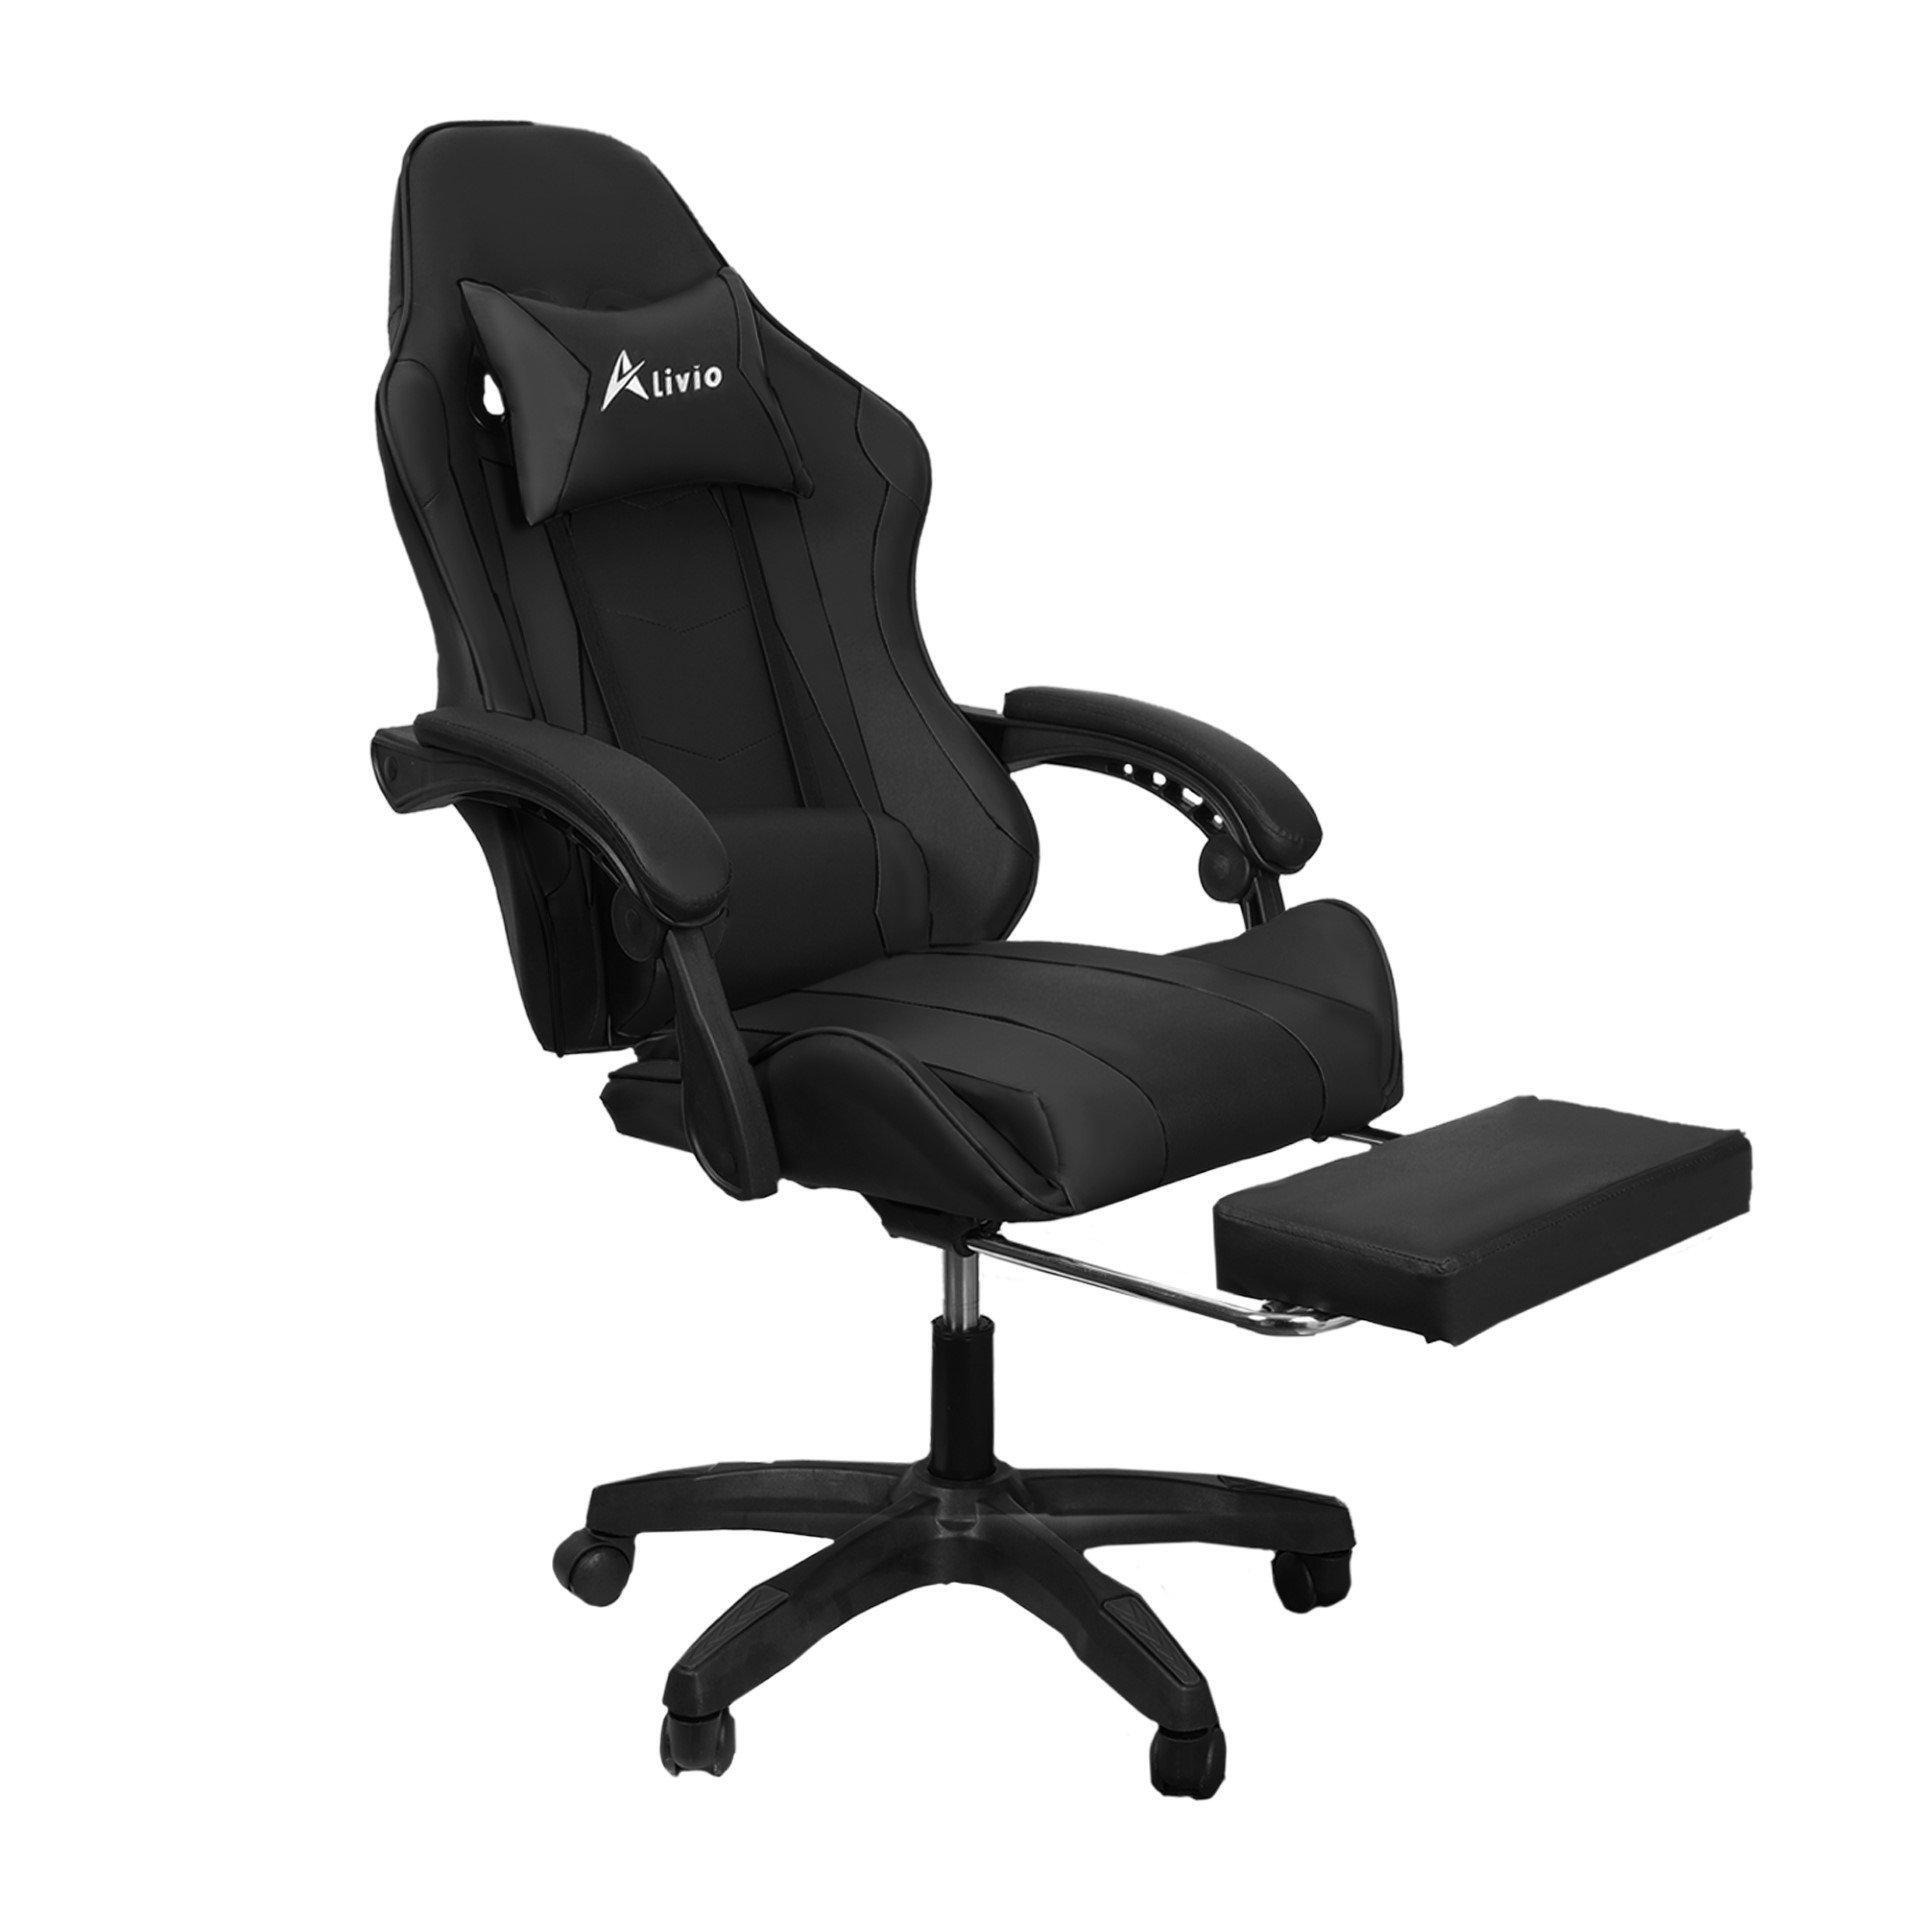 Racing 360 Reclining Swivel Gaming Chair Reclining PU Leather With Footrest & Massager Black - image 1